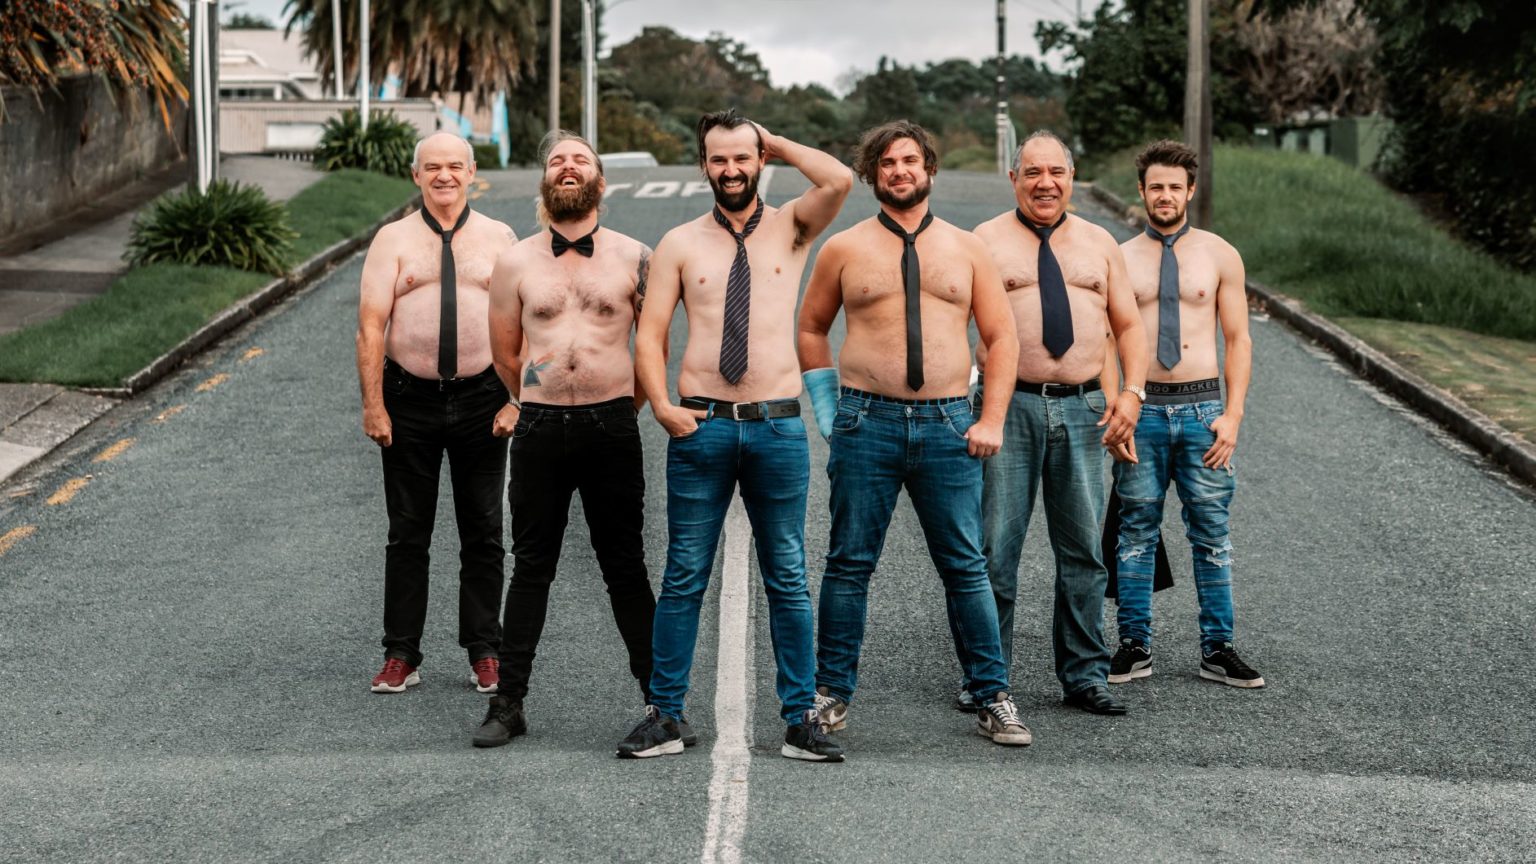 The men behind The Full Monty revealed New Plymouth Little Theatre